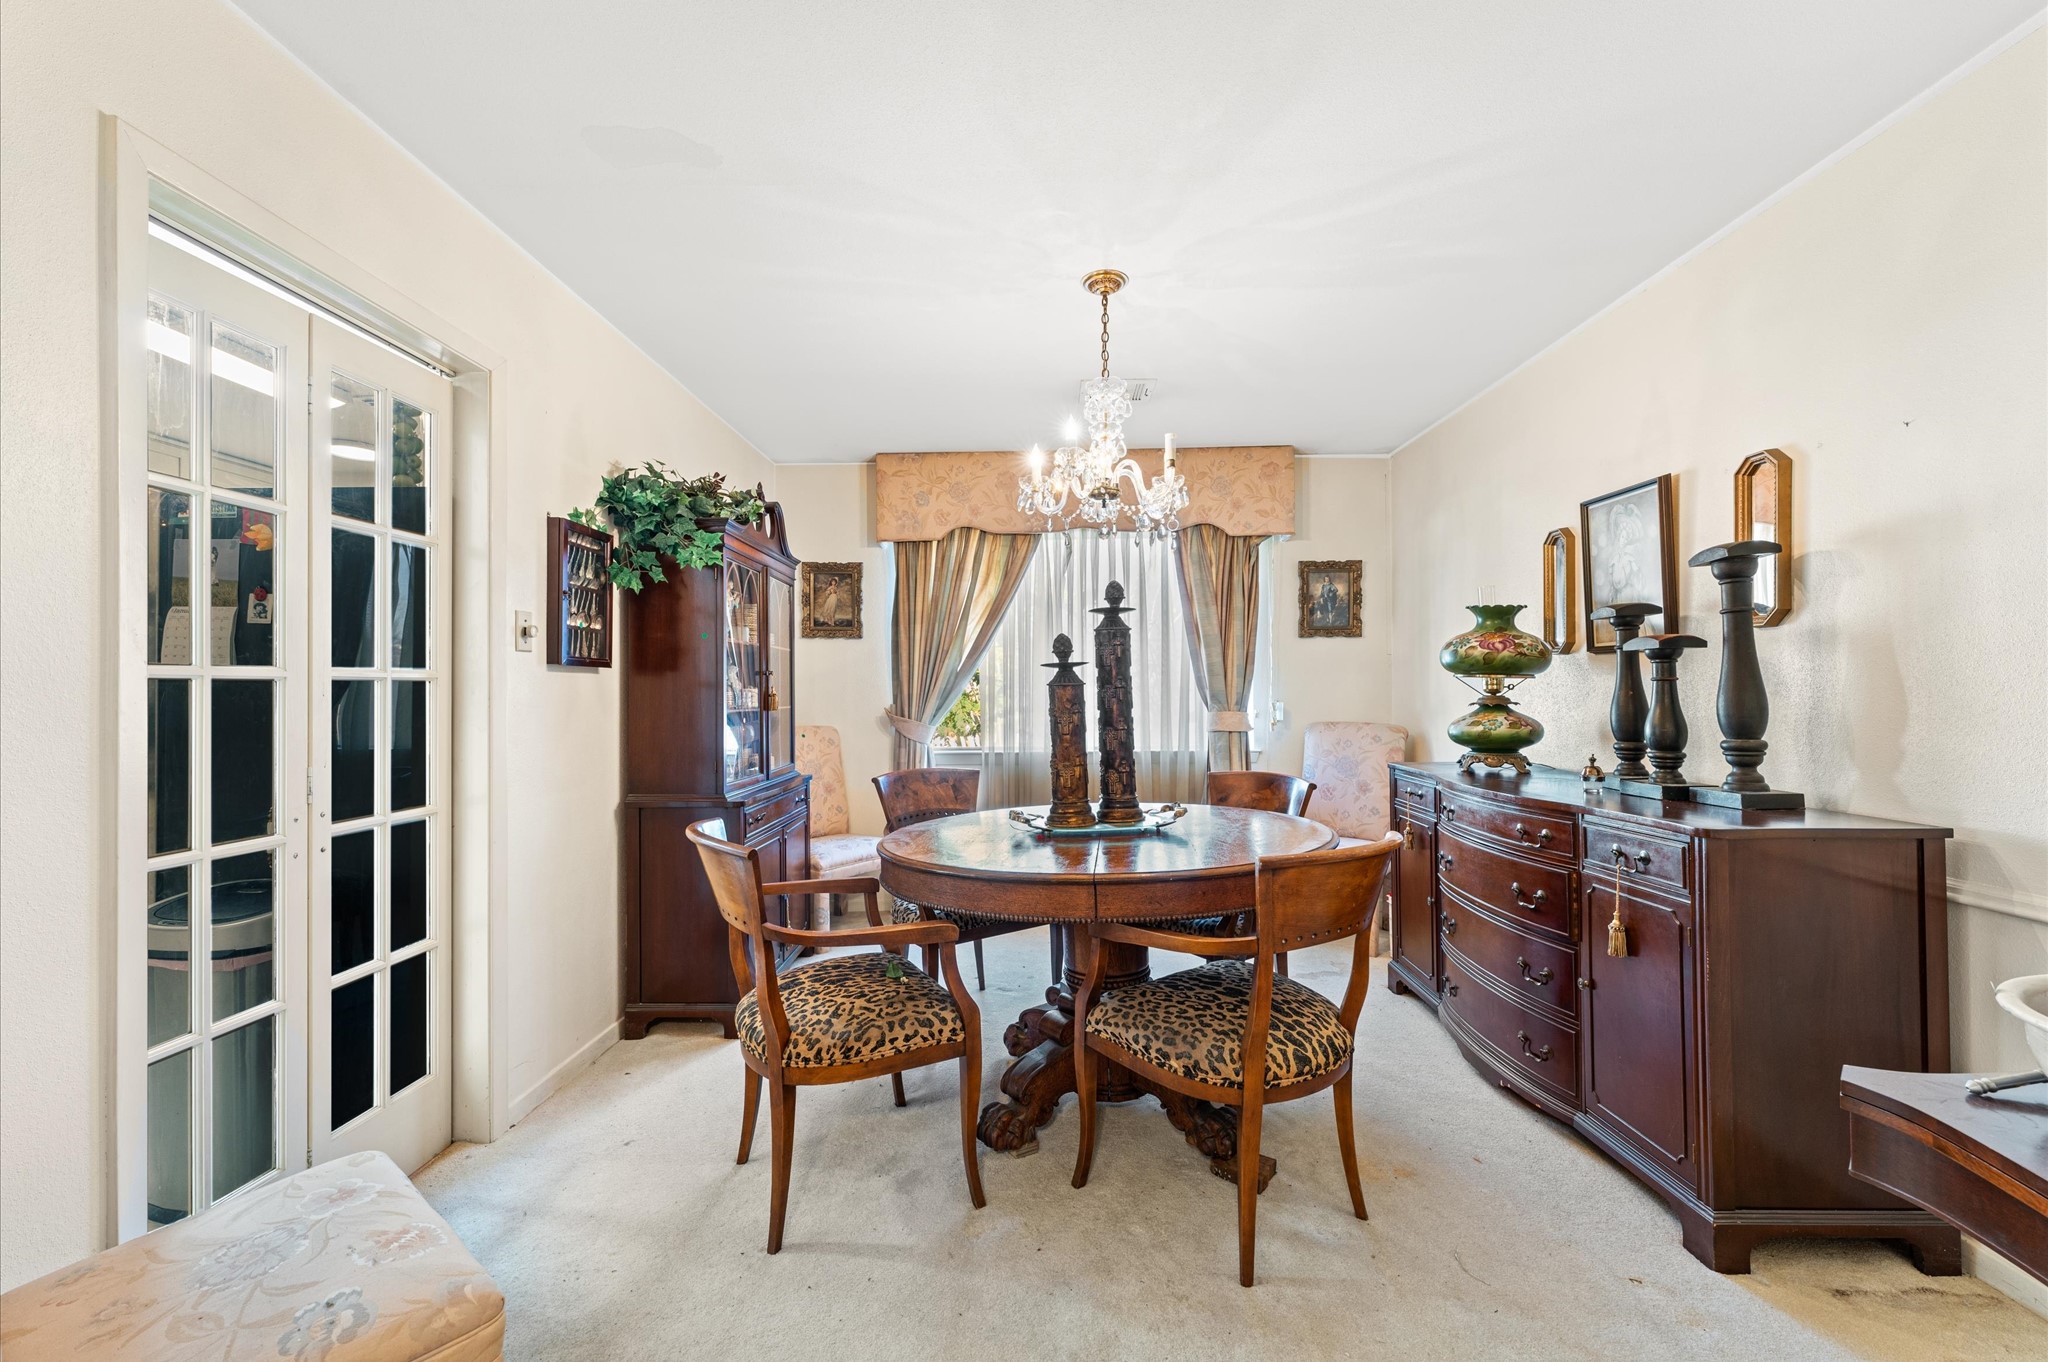 Formal dining room has tasteful vintage chandelier. The dining room is in-between the kitchen and primary bedroom.